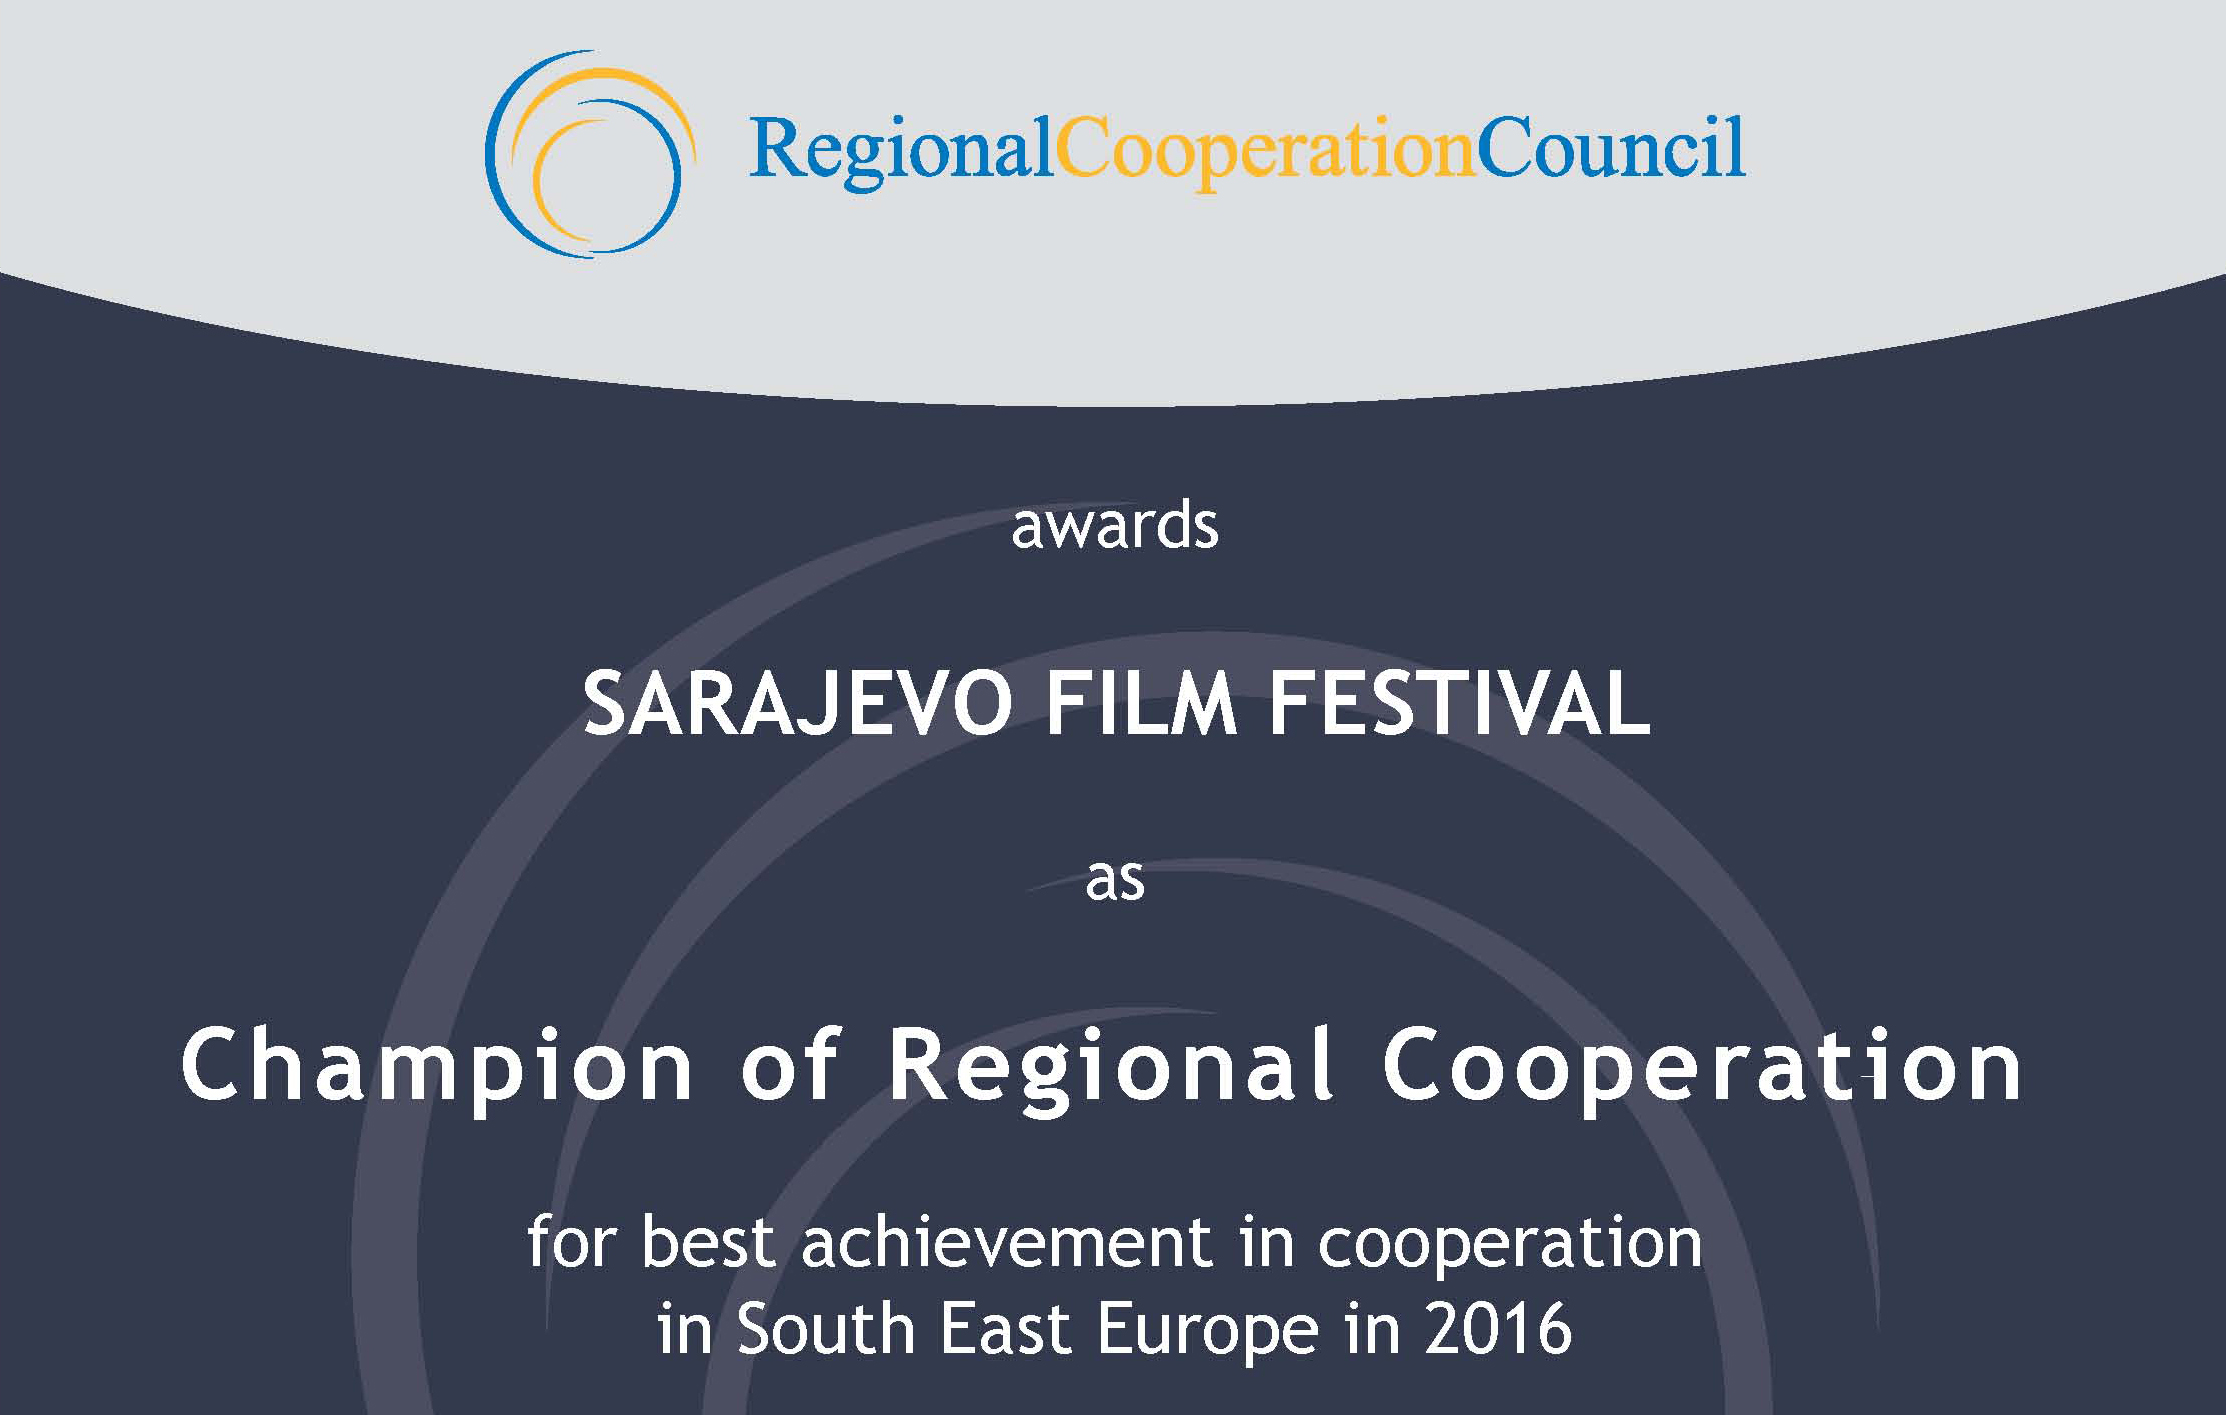 Champion of Regional Cooperation  for 2016